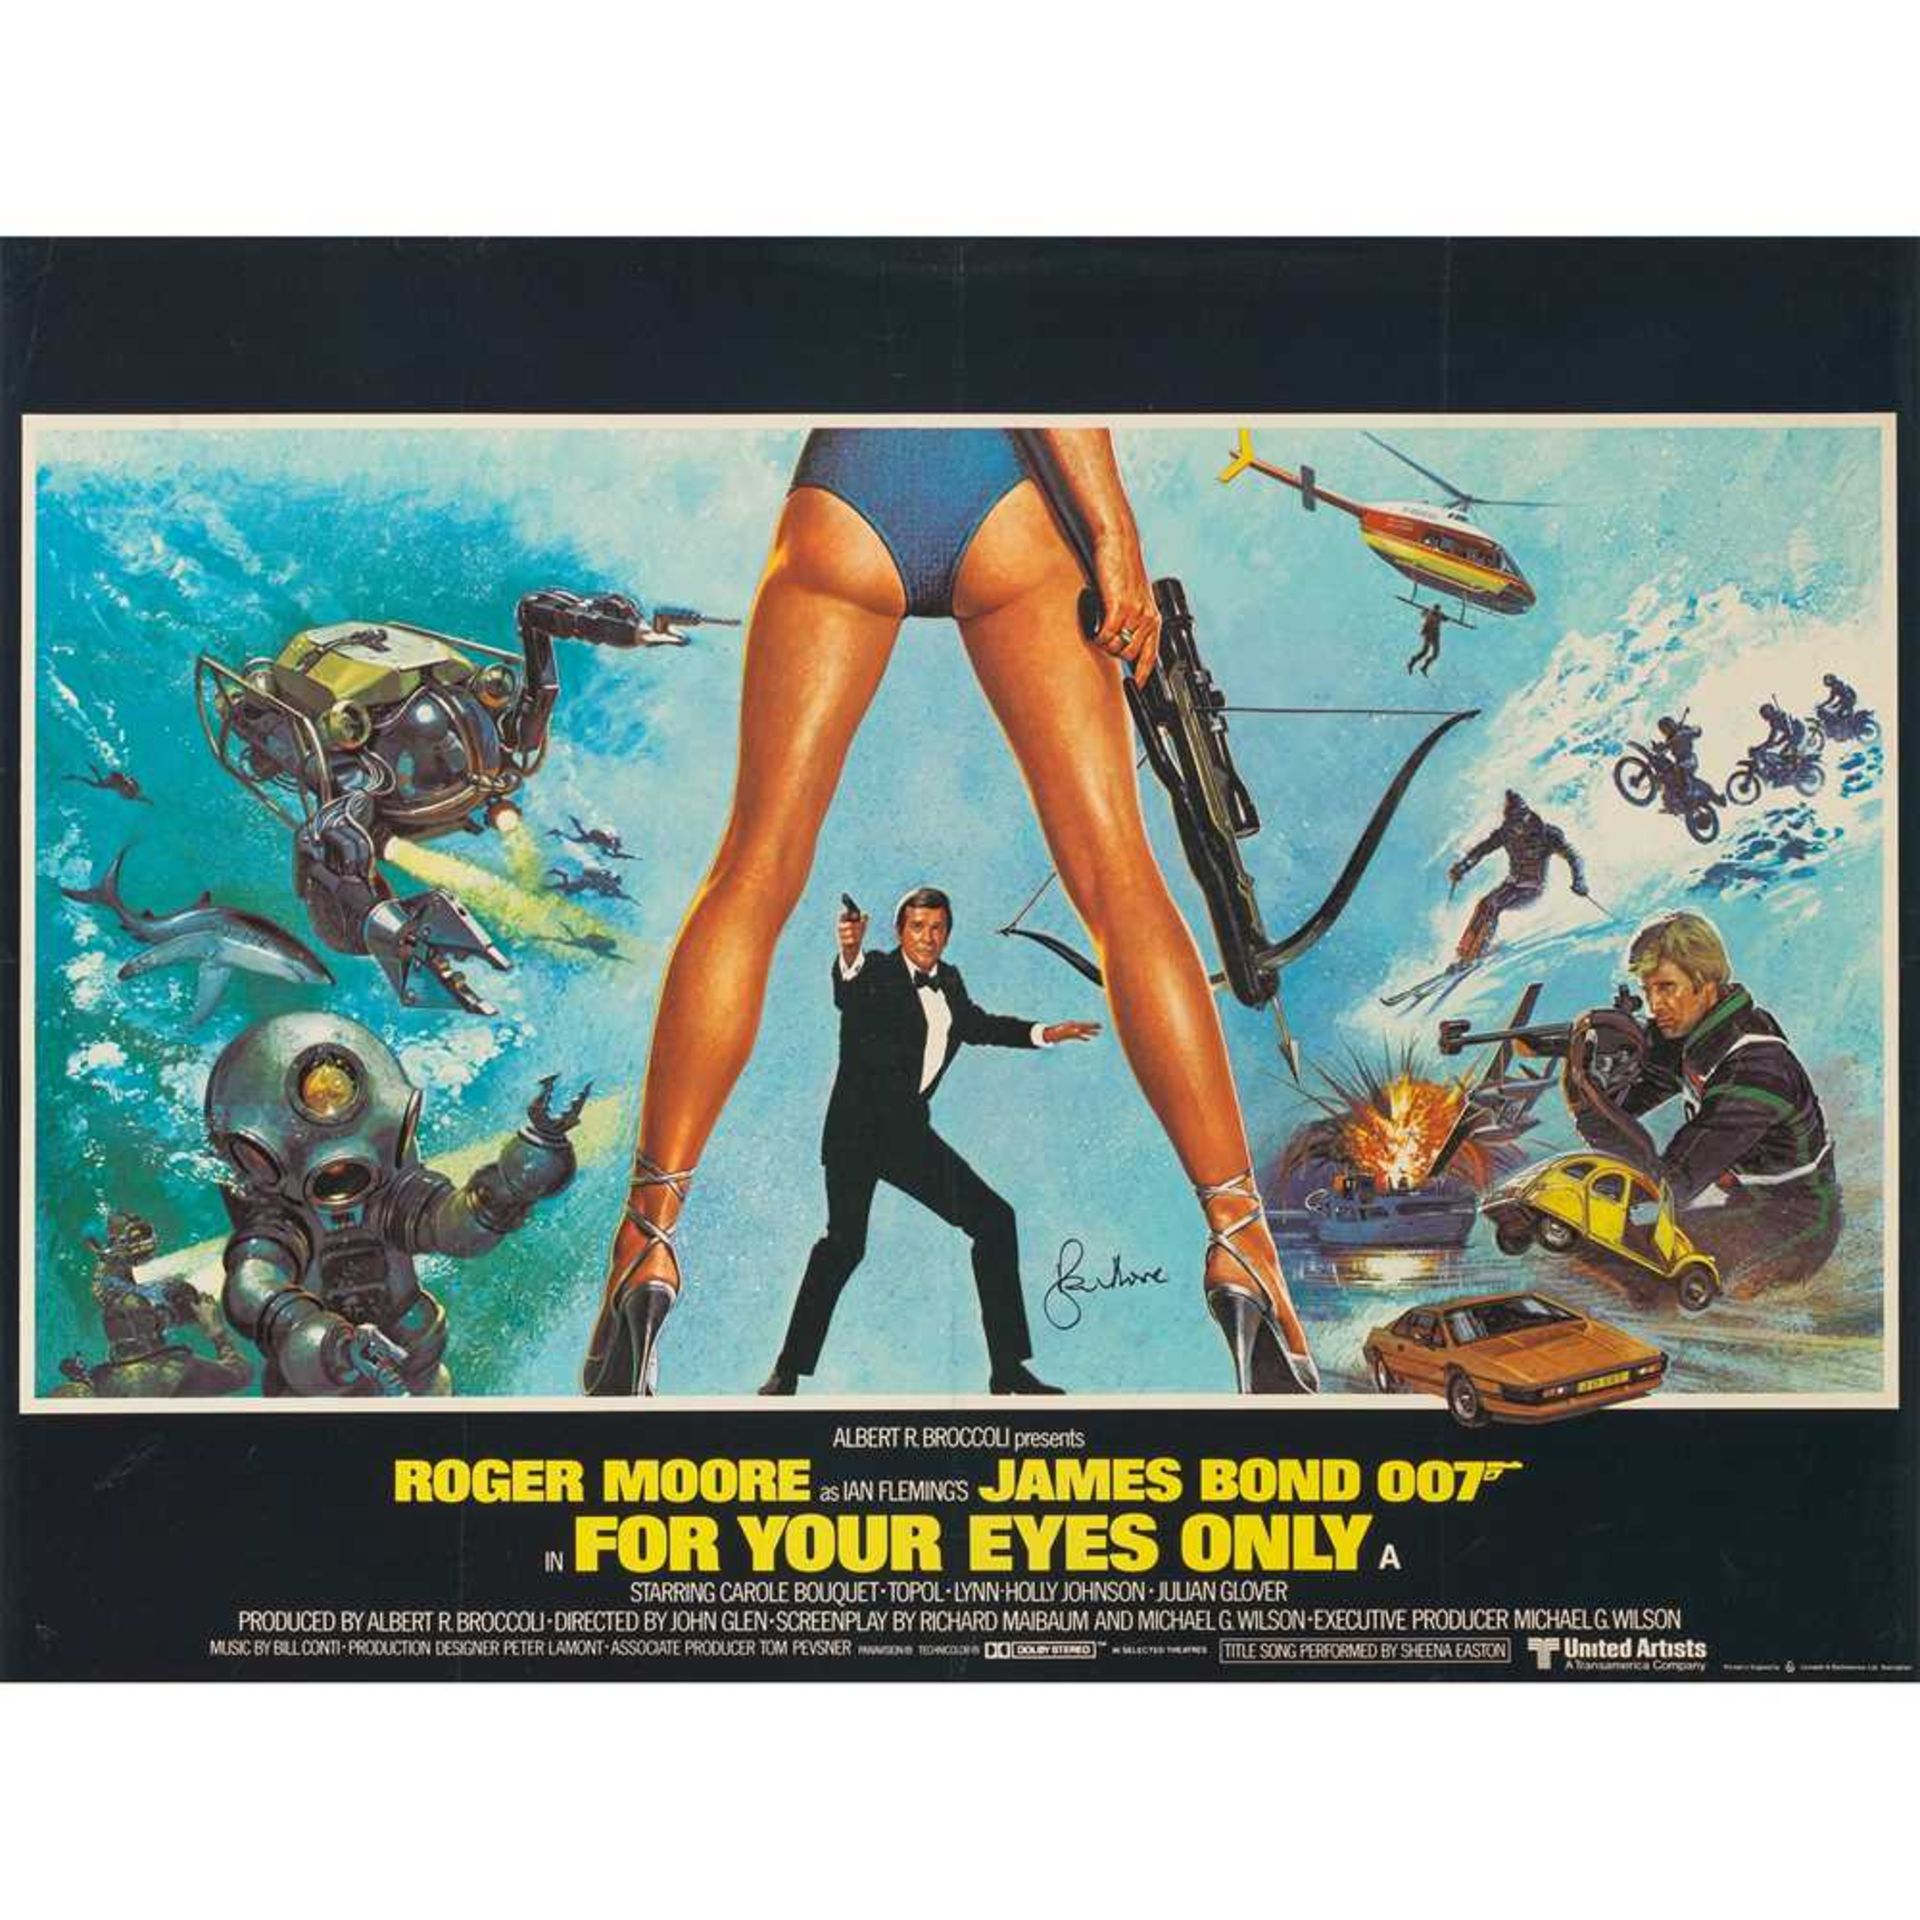 BRIAN BYSOUTH (B.1936) FOR YOUR EYES ONLY, SIGNED BY ROGER MOORE